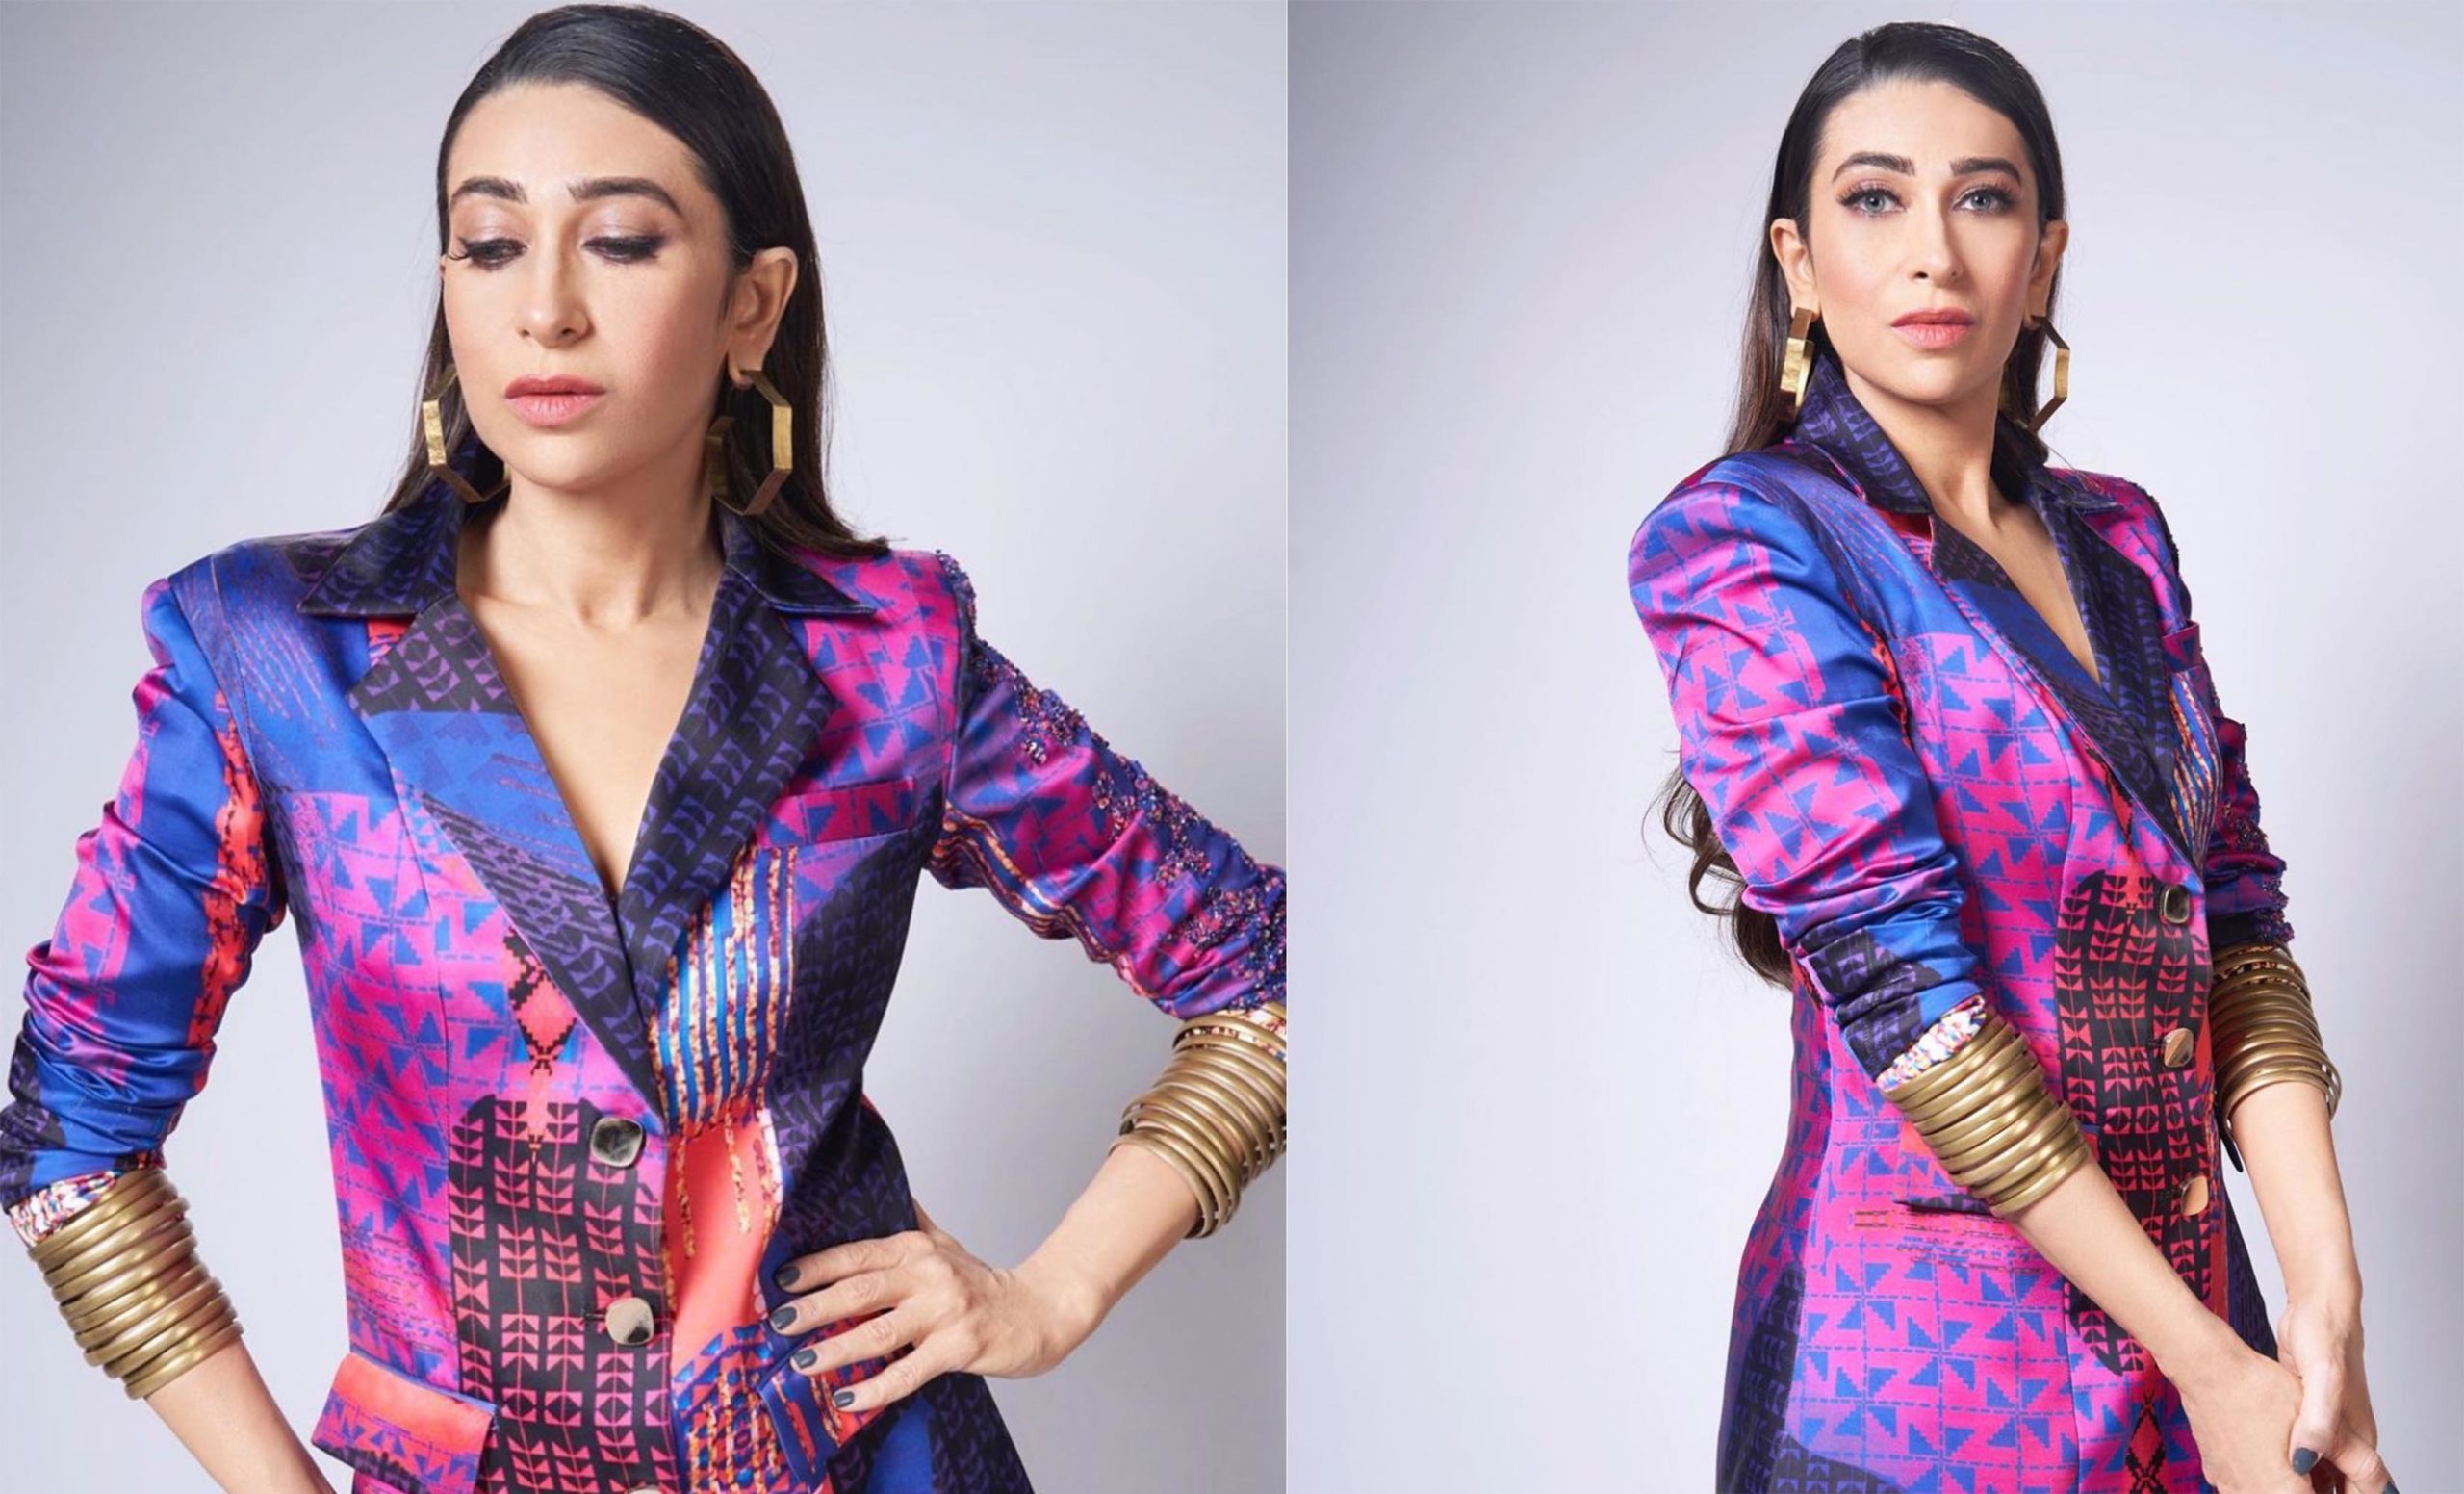 Karishma Kapoor Sex Picture - Karisma Kapoor Styles Power Suit With Traditional Bangles. We Heart It